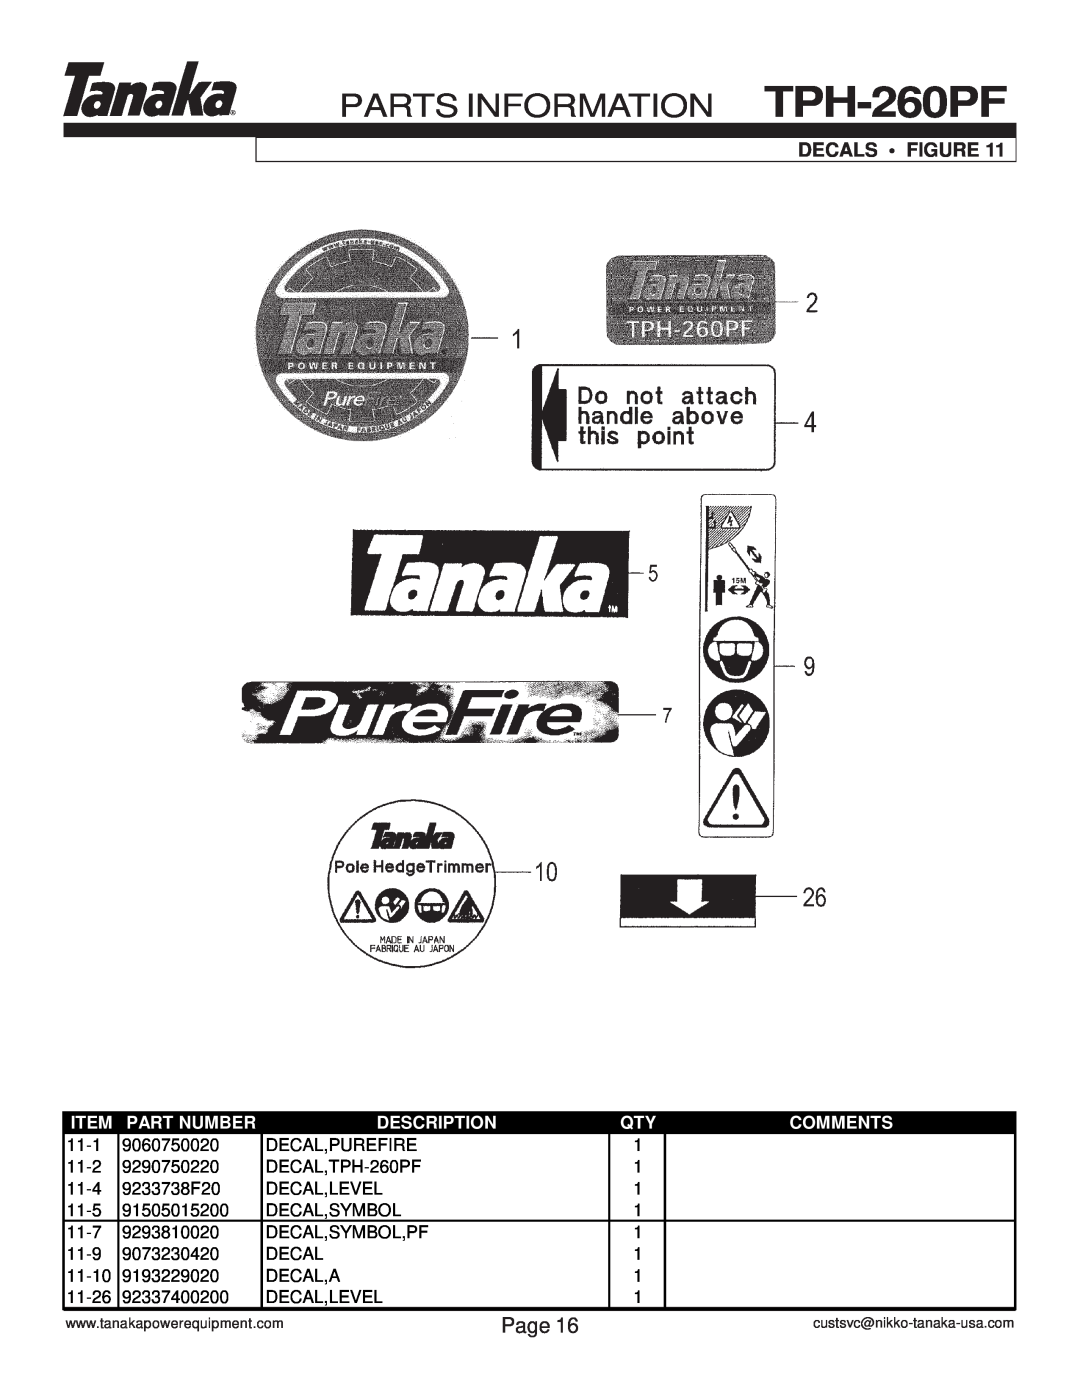 Tanaka manual Decals Figure, PARTS INFORMATION TPH-260PF, Page, Part Number, Description, Comments 